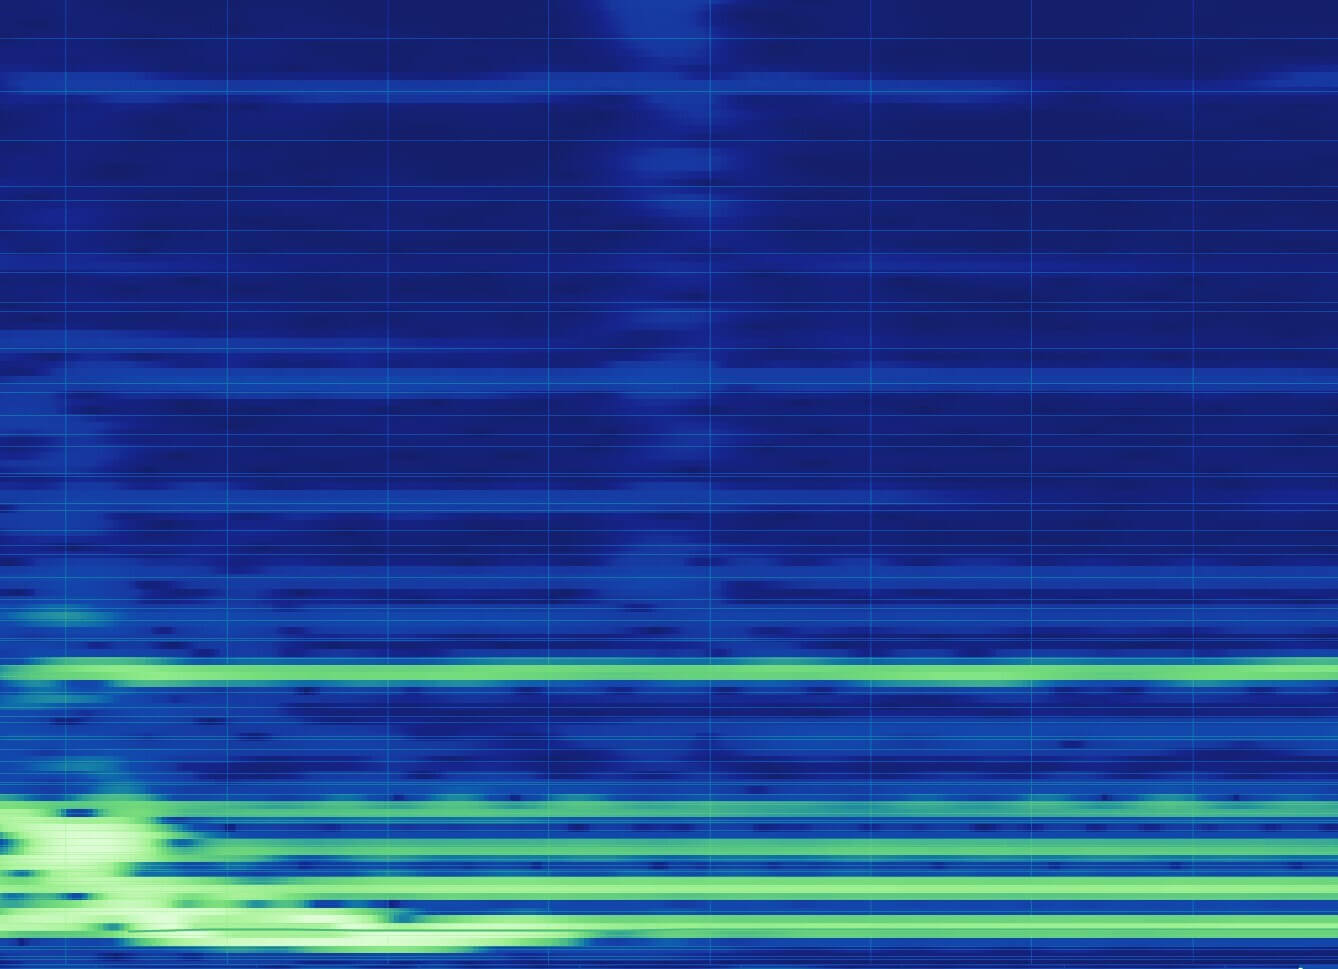 Here is a spectrogram image that represents the frequency information of that same 16-bit  lossy audio file.

Typically, a lossy alogorithim will remove bist of frequency information in the 10 - 20 kHz frequency range. IN addition to the sub frequencies (2- - 40 Hz), these frequcneis are harder for a speaker to reproduce. Therefore a lossy algorithim cuts them as they're harder to hear.